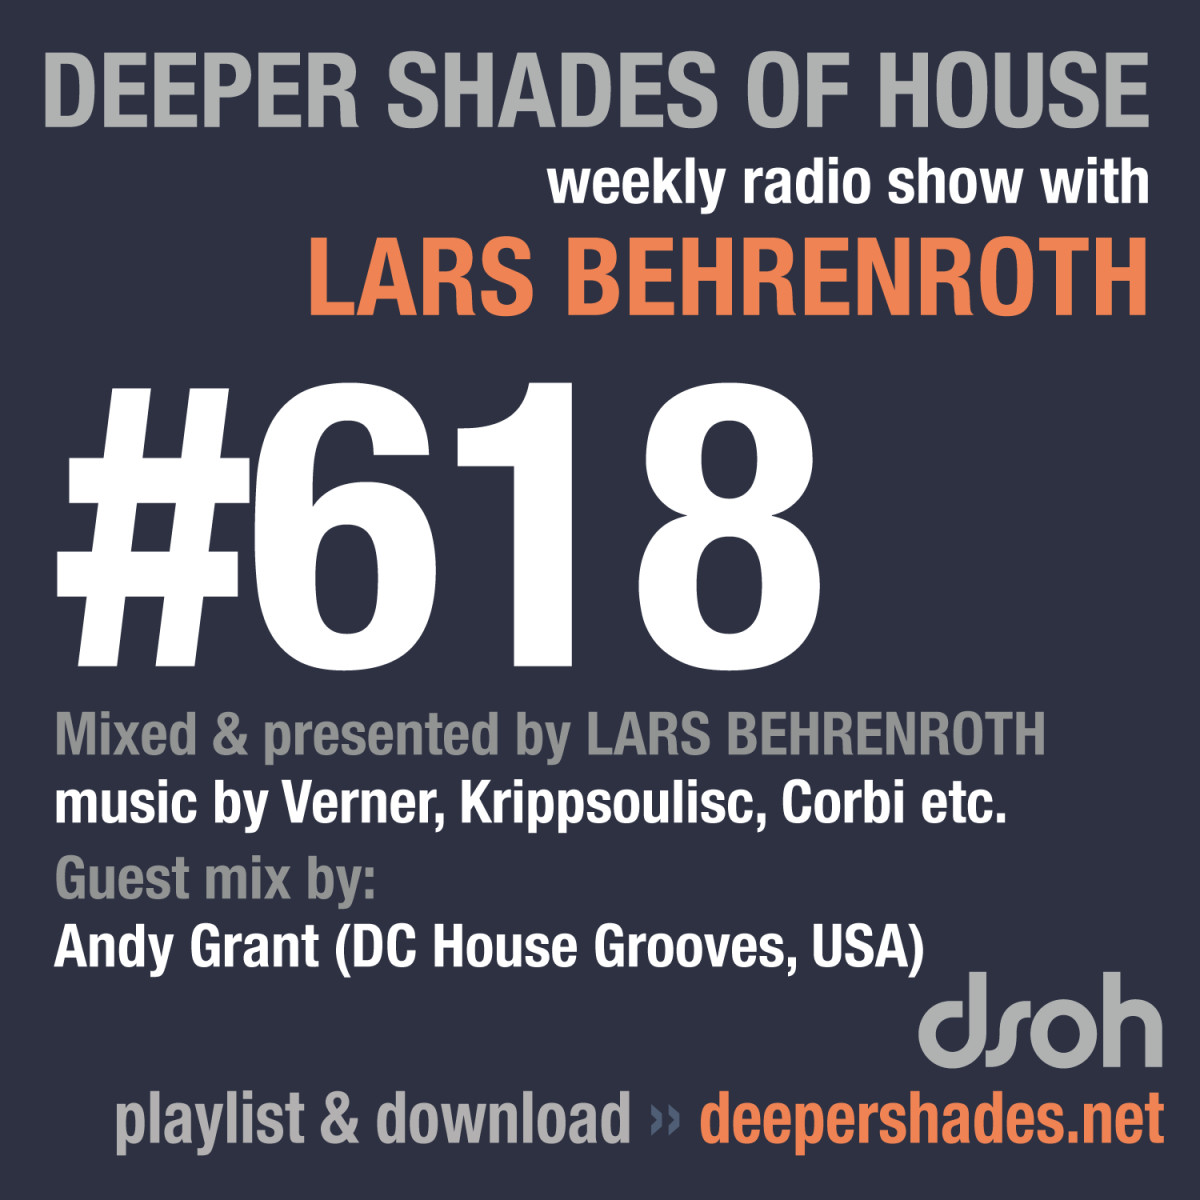 #nowplaying on radio.deepershades.net : Lars Behrenroth w/ excl. guest mix by ANDY GRANT (DC House Grooves) - DSOH #618 Deeper Shades Of House #deephouse #livestream #dsoh #housemusic